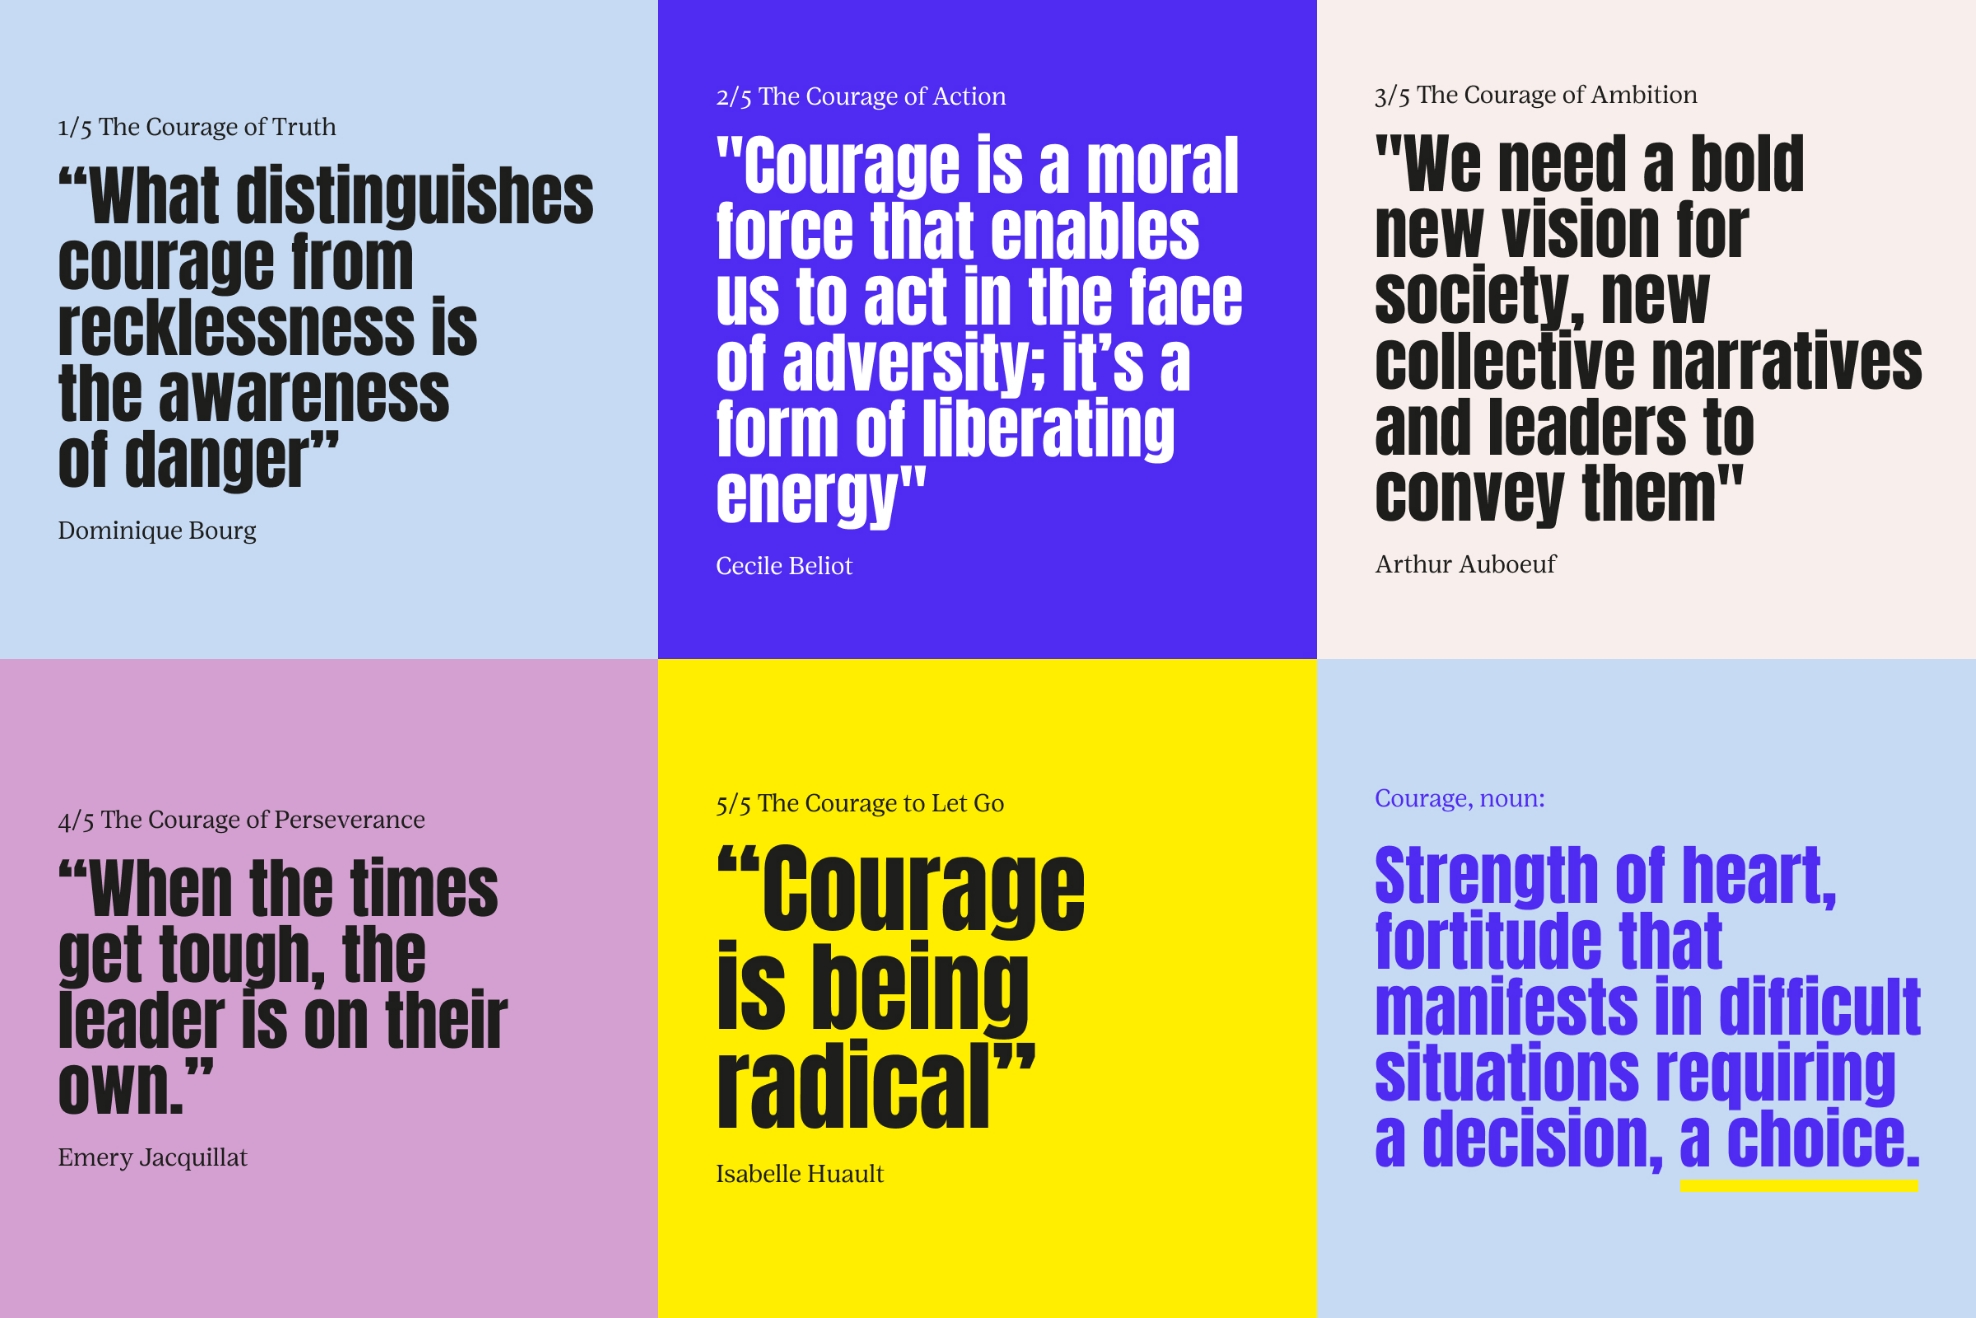 Instagram thumbnails. Militant colorful placards. The courage of truth. Downstairs Design.